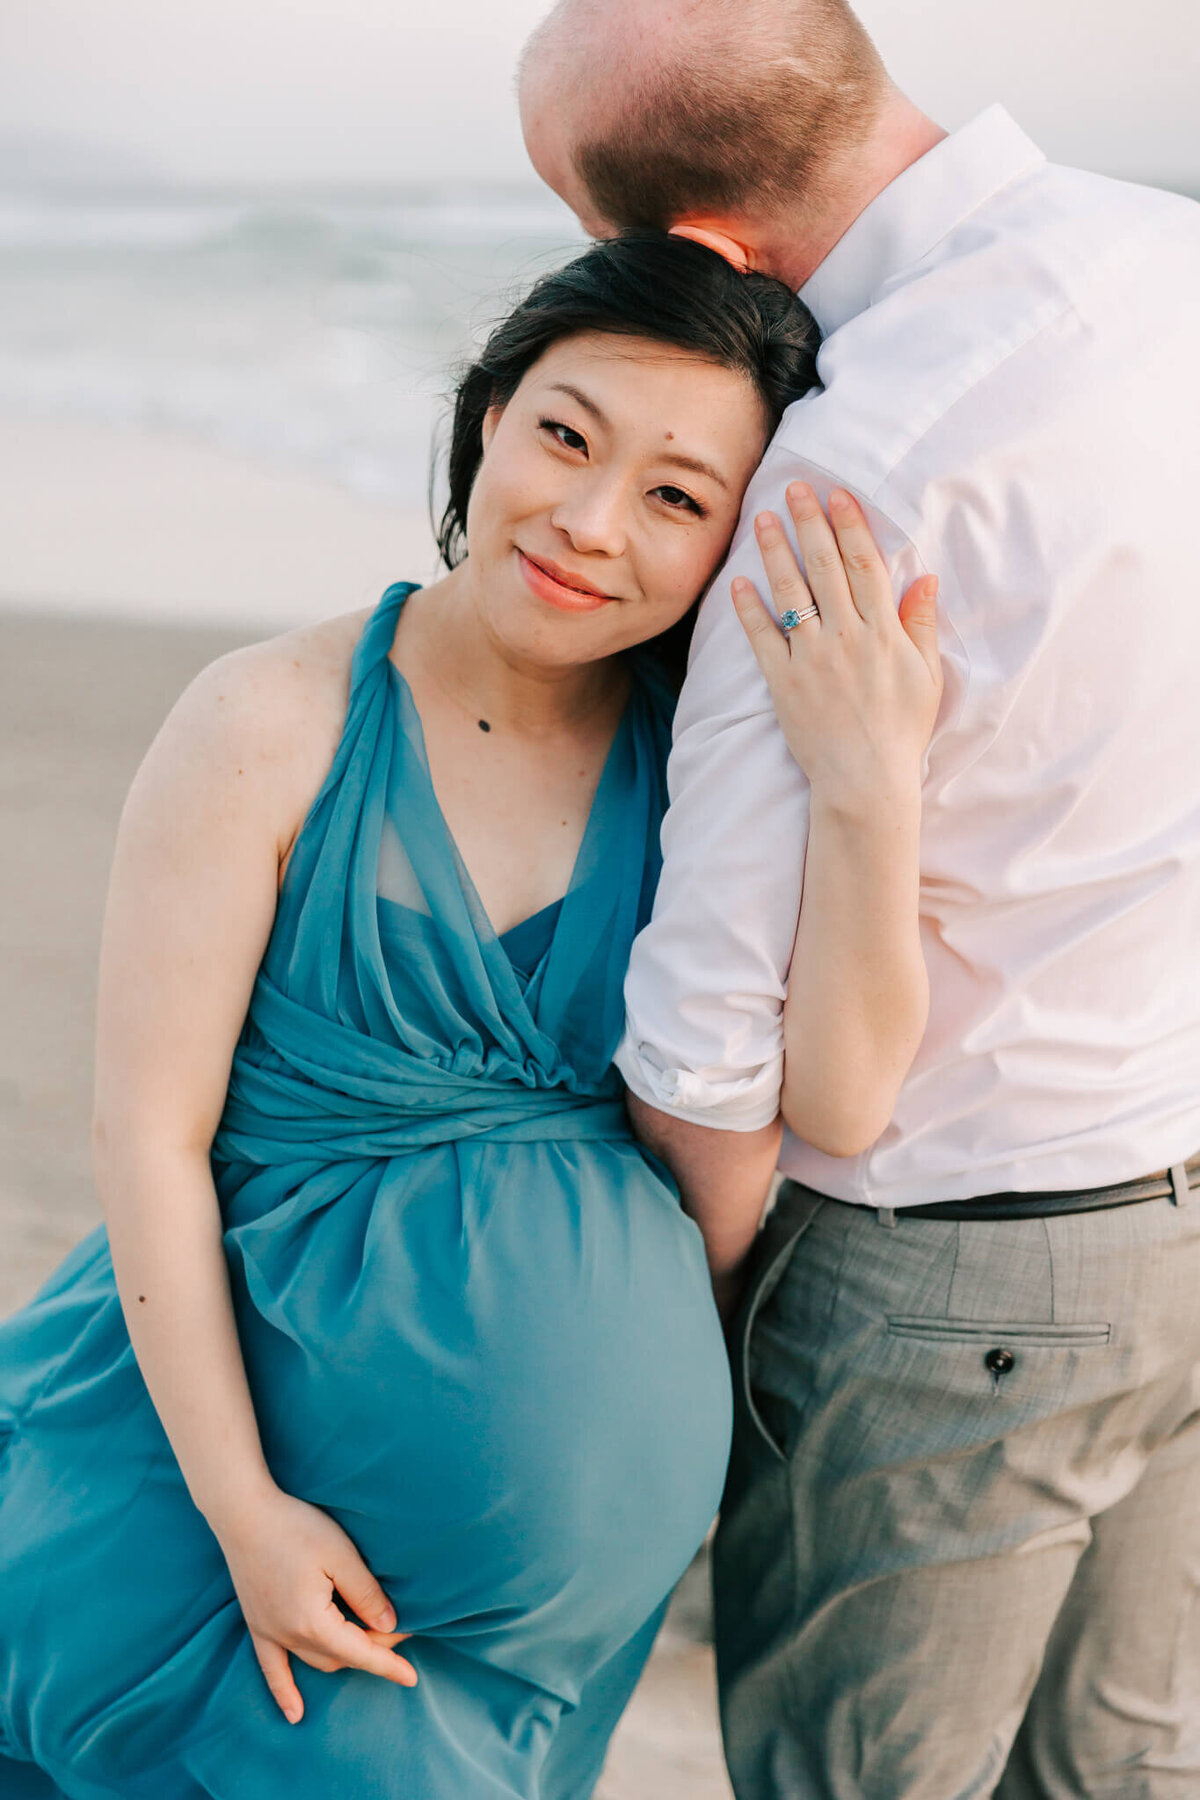 mom holding husband in beach maternity photograph for wearing blue while husband wears white shirt and grey pants